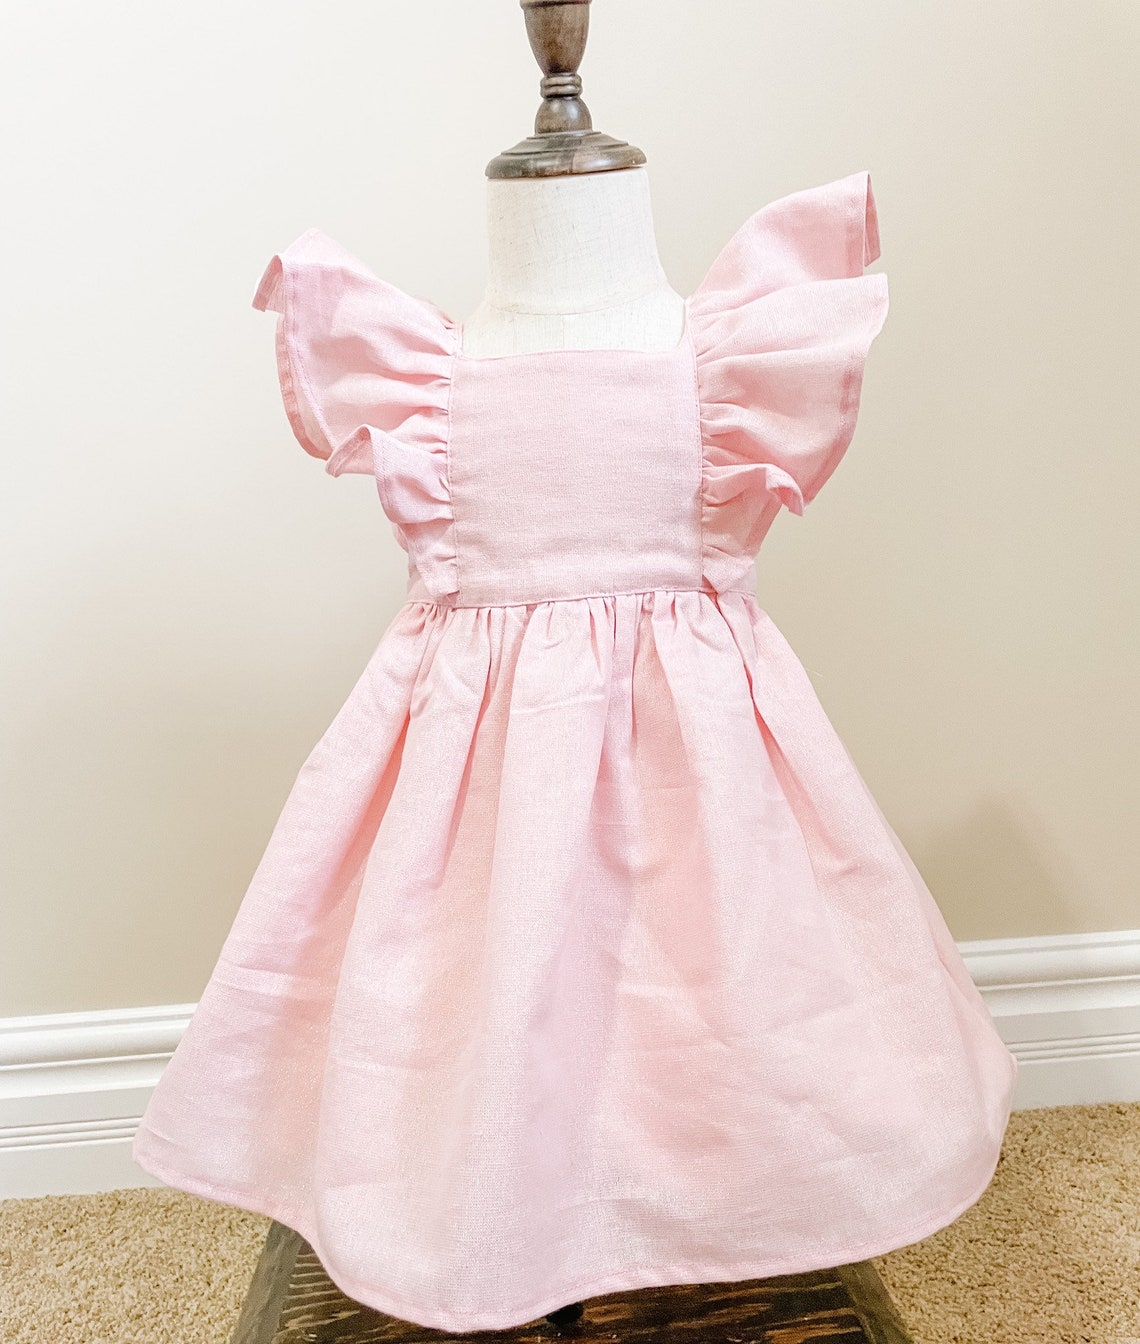 Pinafore Linen Girl's Dress with a Bow. Made in Canada by Oakley Rae Handmade